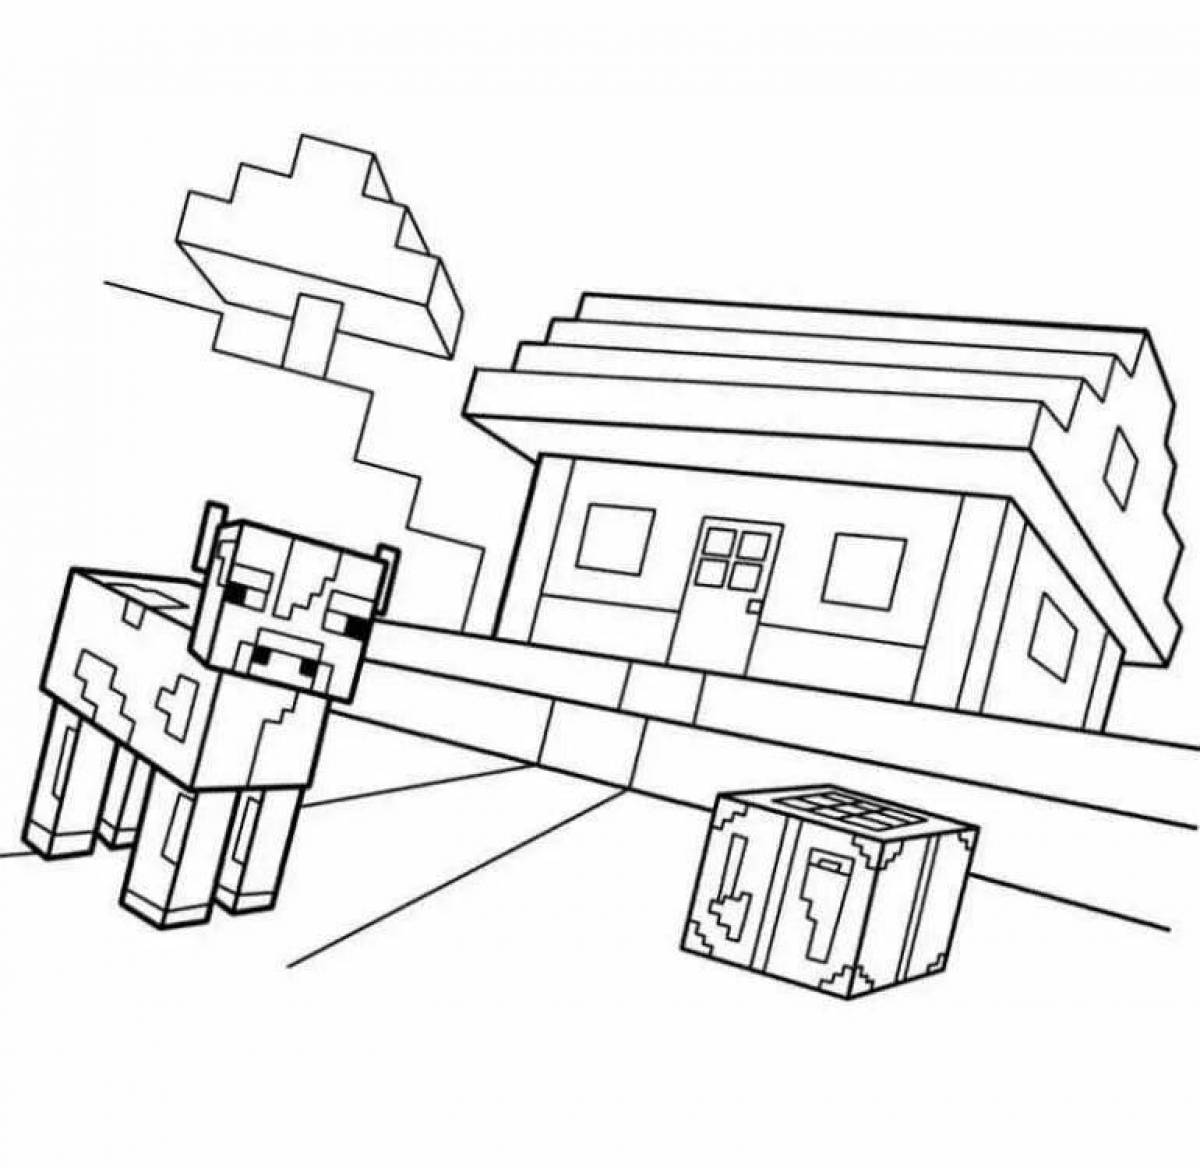 Awesome minecraft villager coloring book